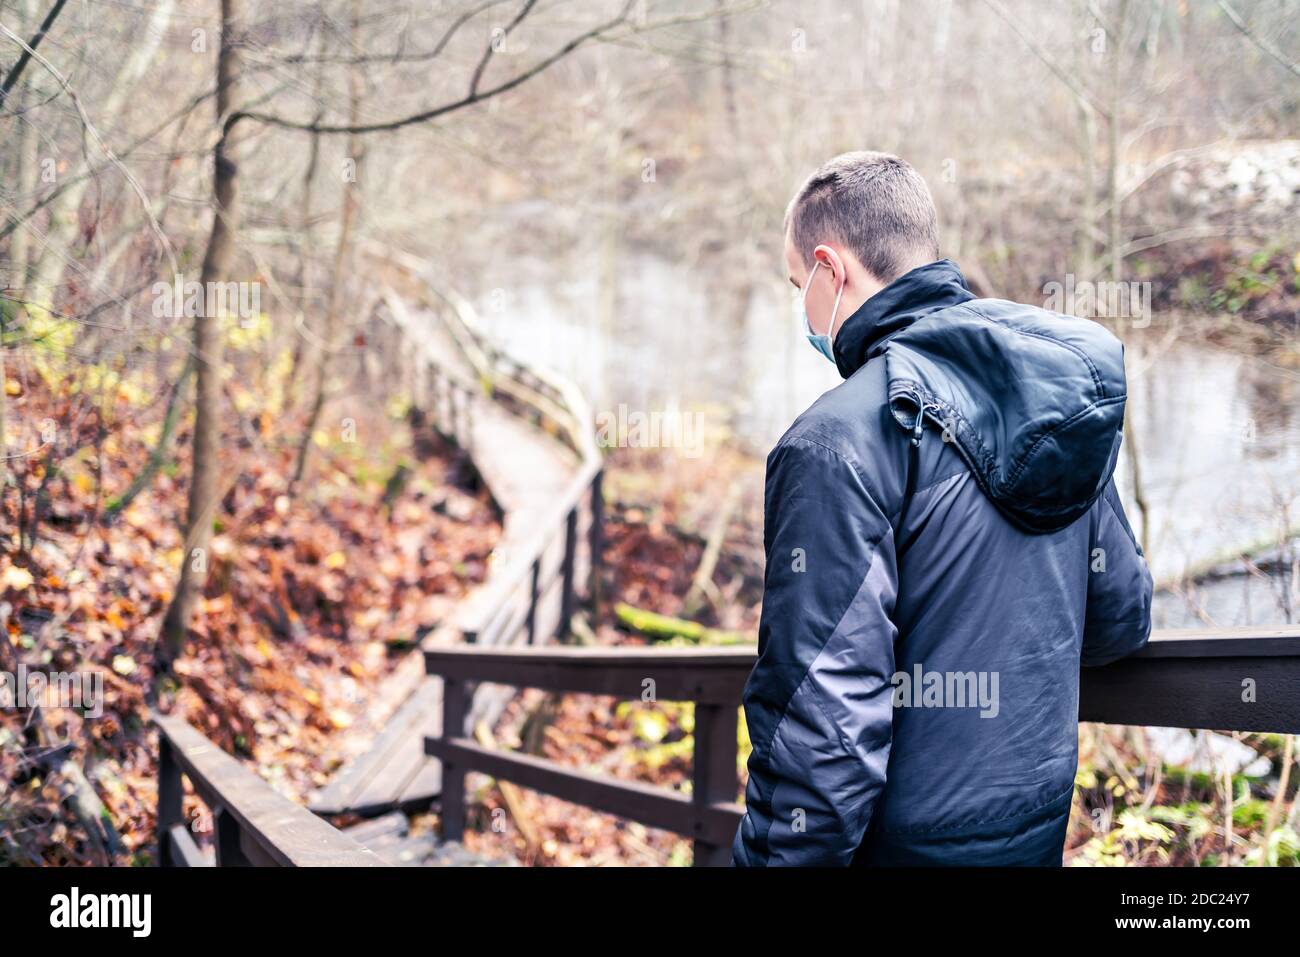 Man wearing a corona virus mask while walking outdoors in the nature in winter or autumn. Young person hiking the forest during coronavirus pandemic. Stock Photo